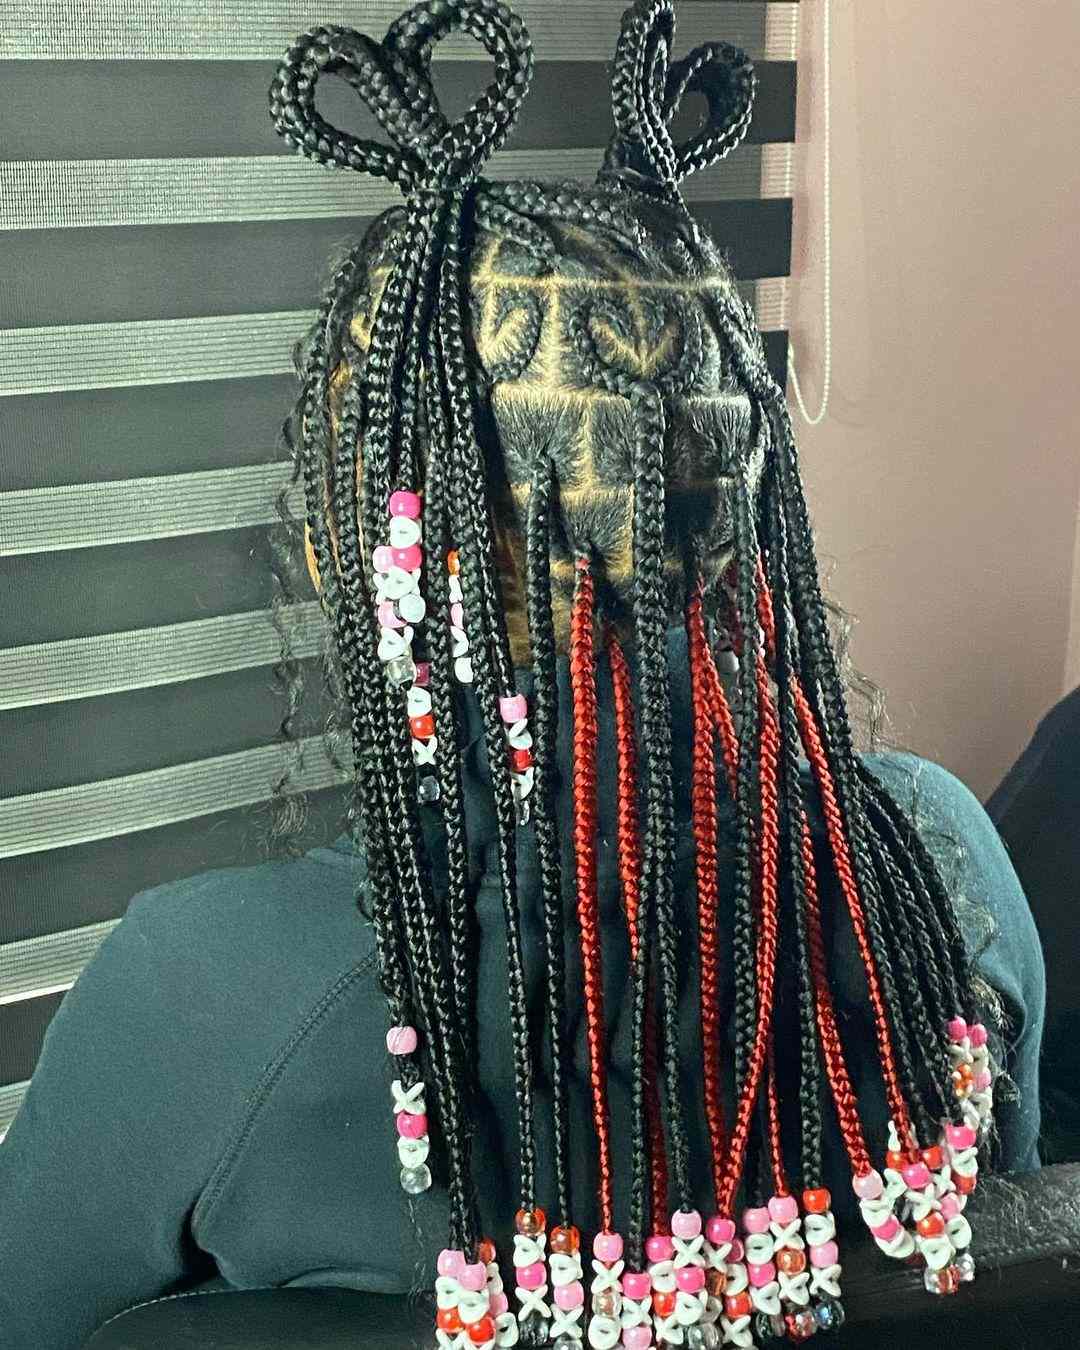 Heart braids with beads